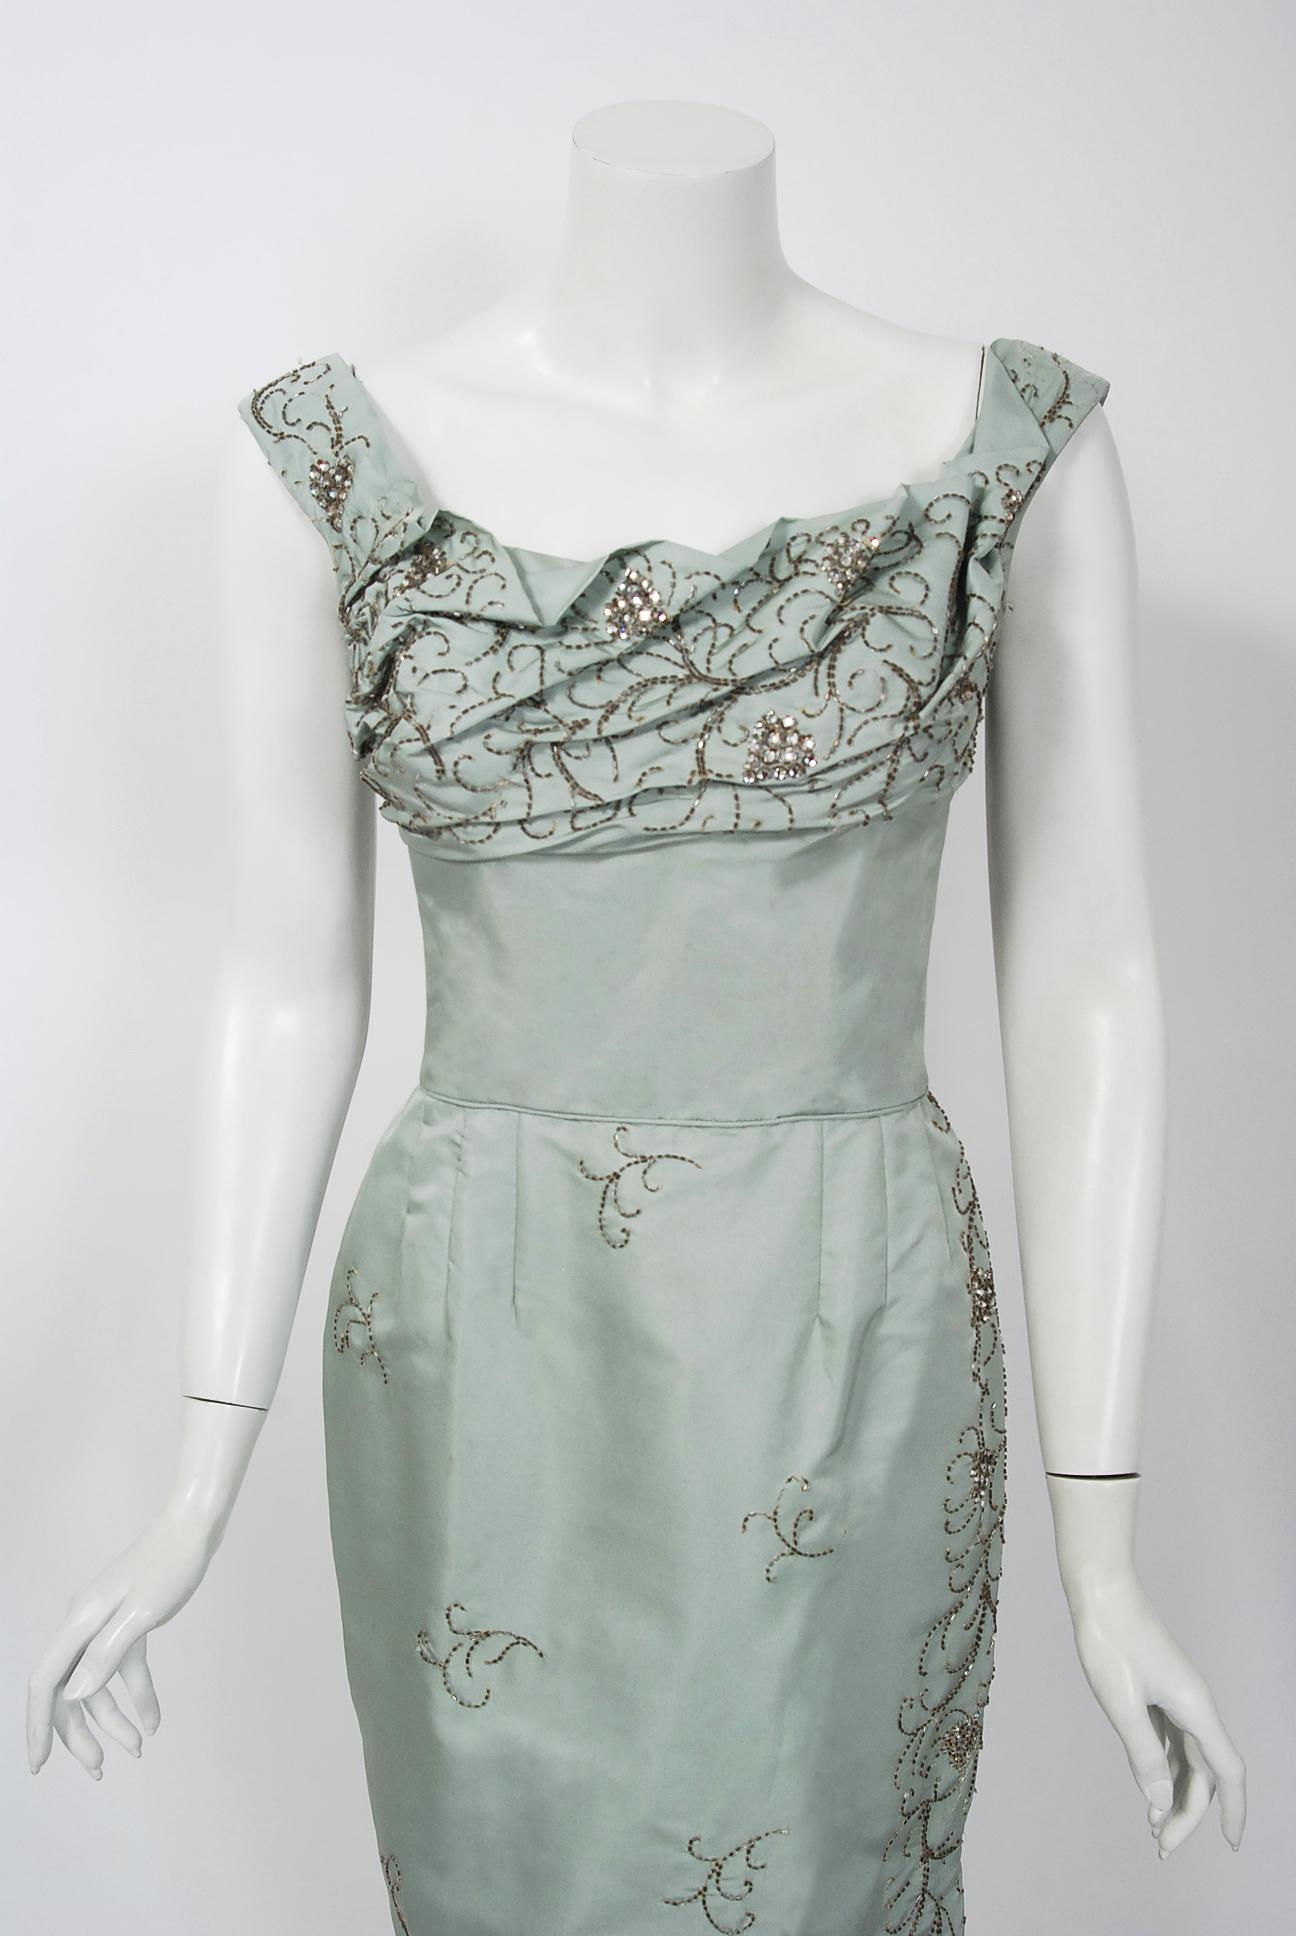 This is such a breathtaking cocktail dress from the iconic Ceil Chapman designer label. Perfect for any upcoming special event; you can't help but feel feminine in this beauty. The garment is fashioned from stunning mid-weight baby-blue lined silk.